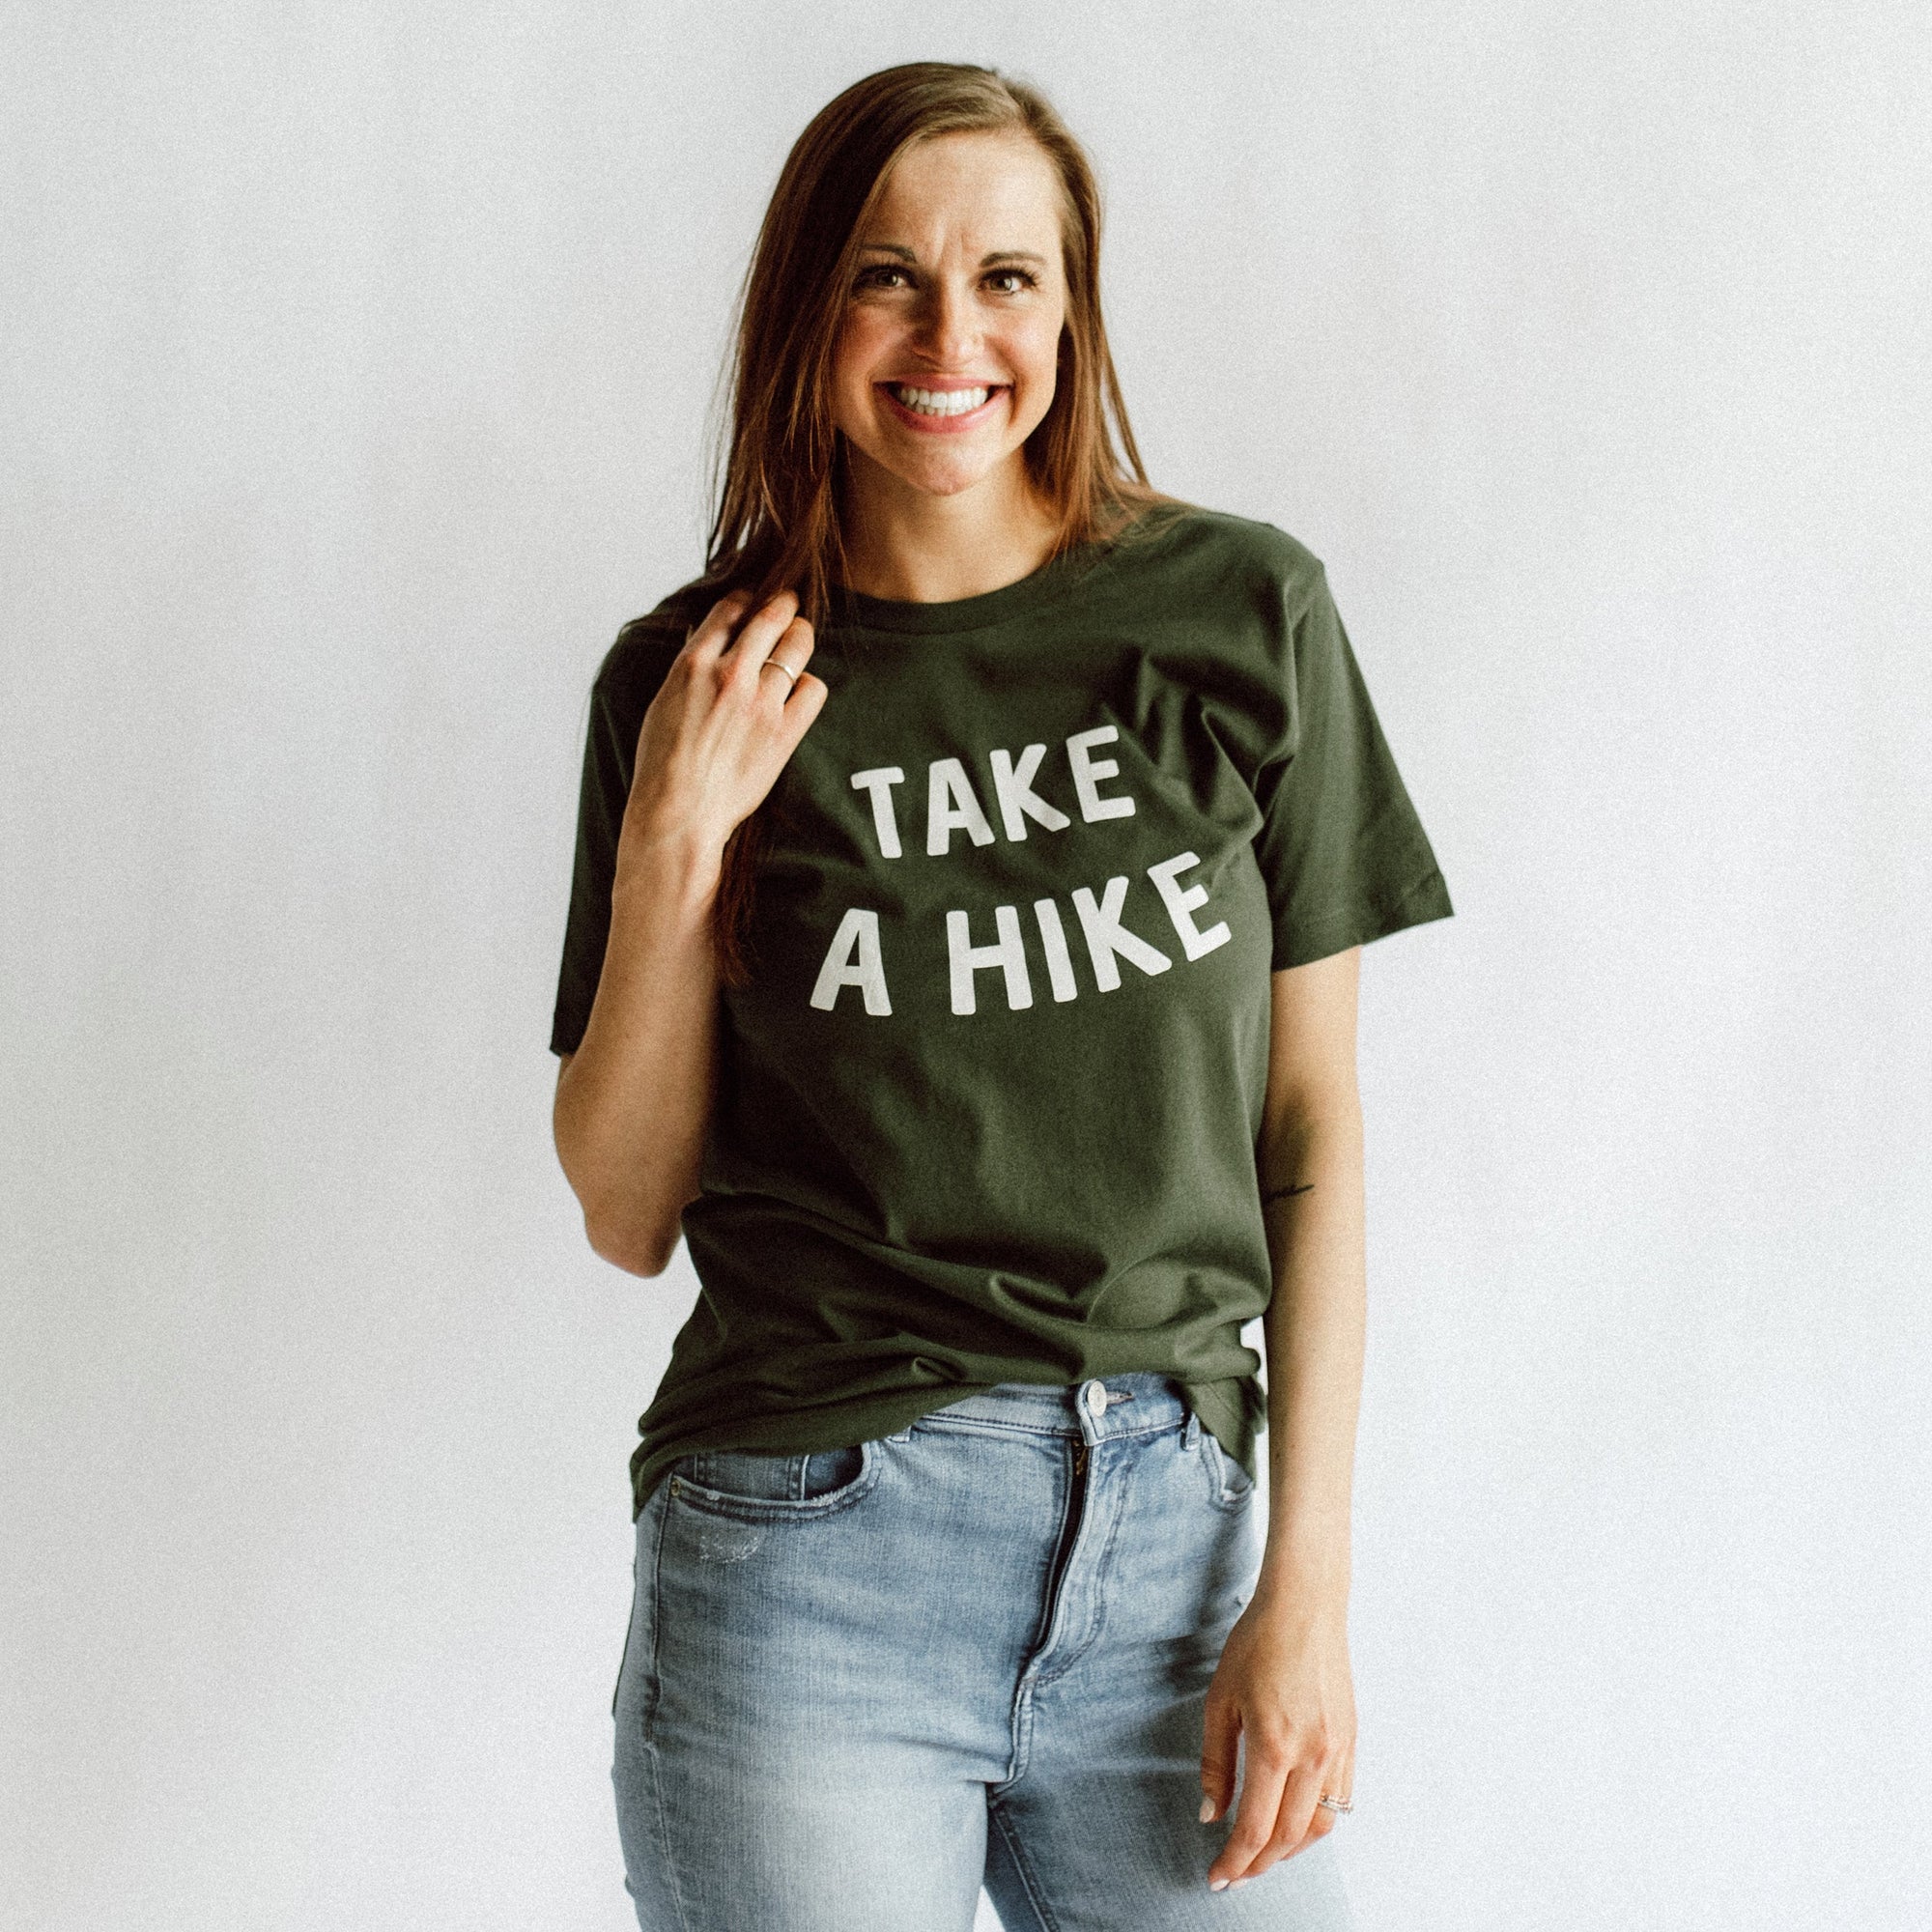 Take A Hike Unisex Tee womens August Ink 